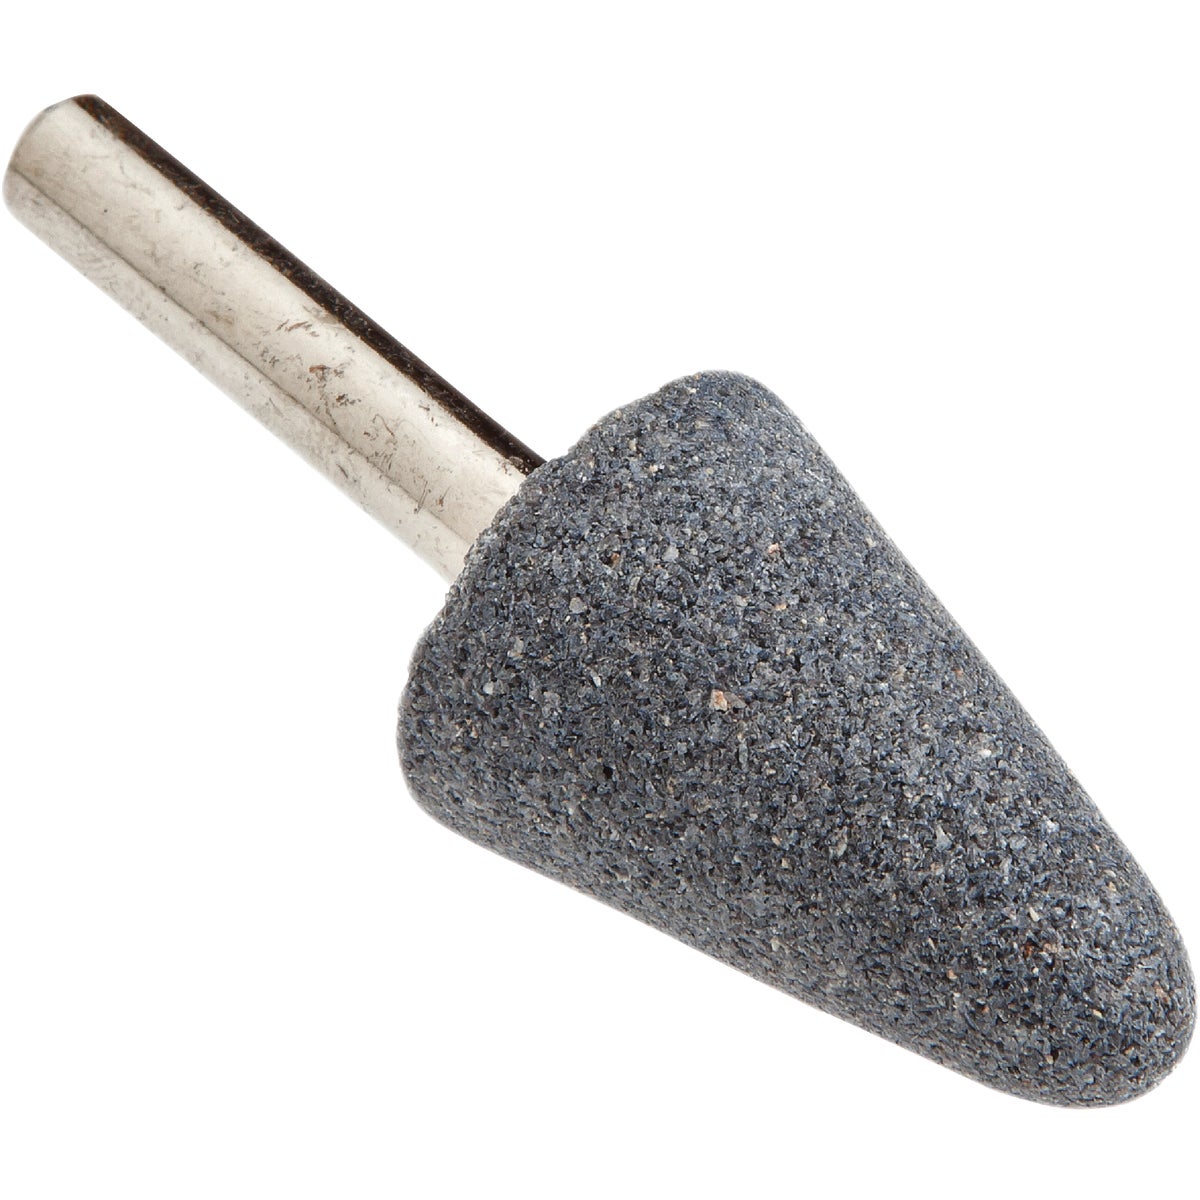 Forney Mounted Point, A5 1-1/8 x 3/4 In. Grinding Stone